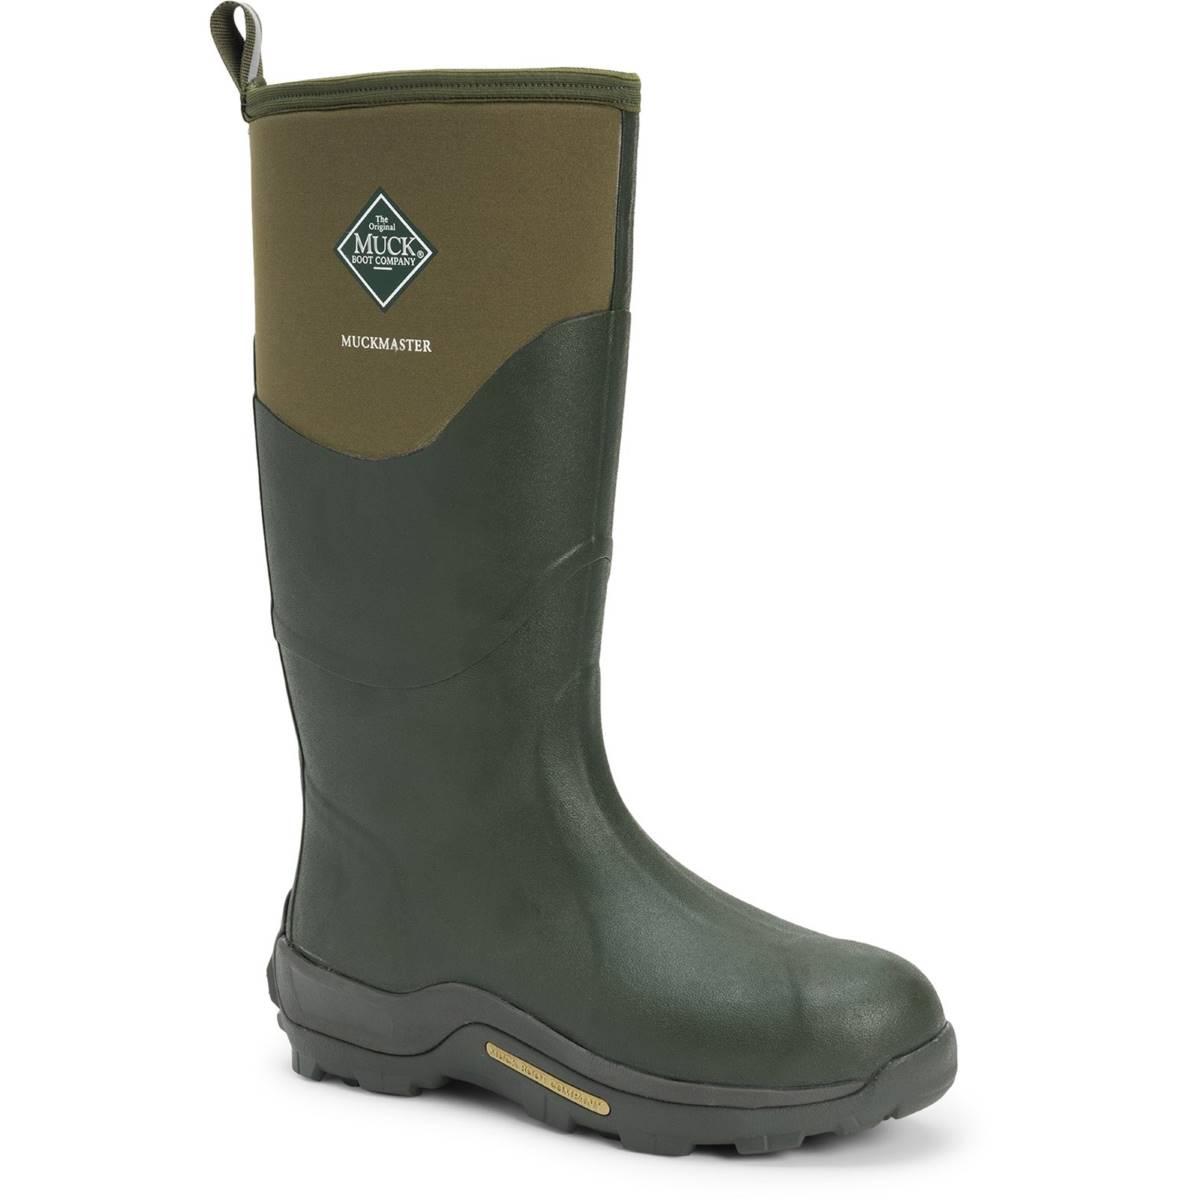 Muck Boots Muckmaster Hi Green Mens boots MMH-333A in a Plain Rubber in Size 12